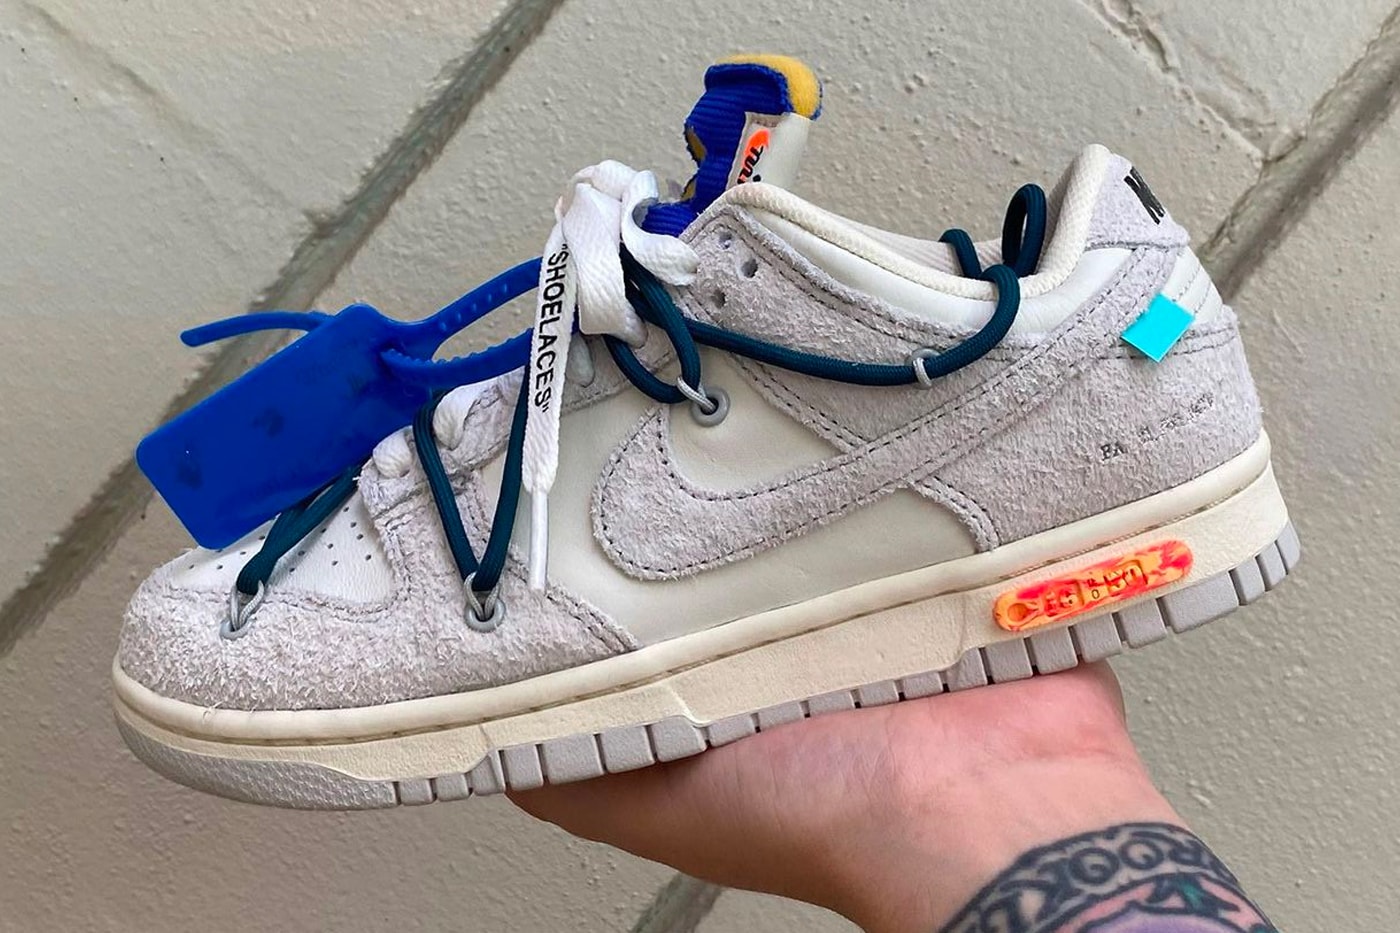 Latest Off-White x Nike Dunk Trainer Releases & Next Drops